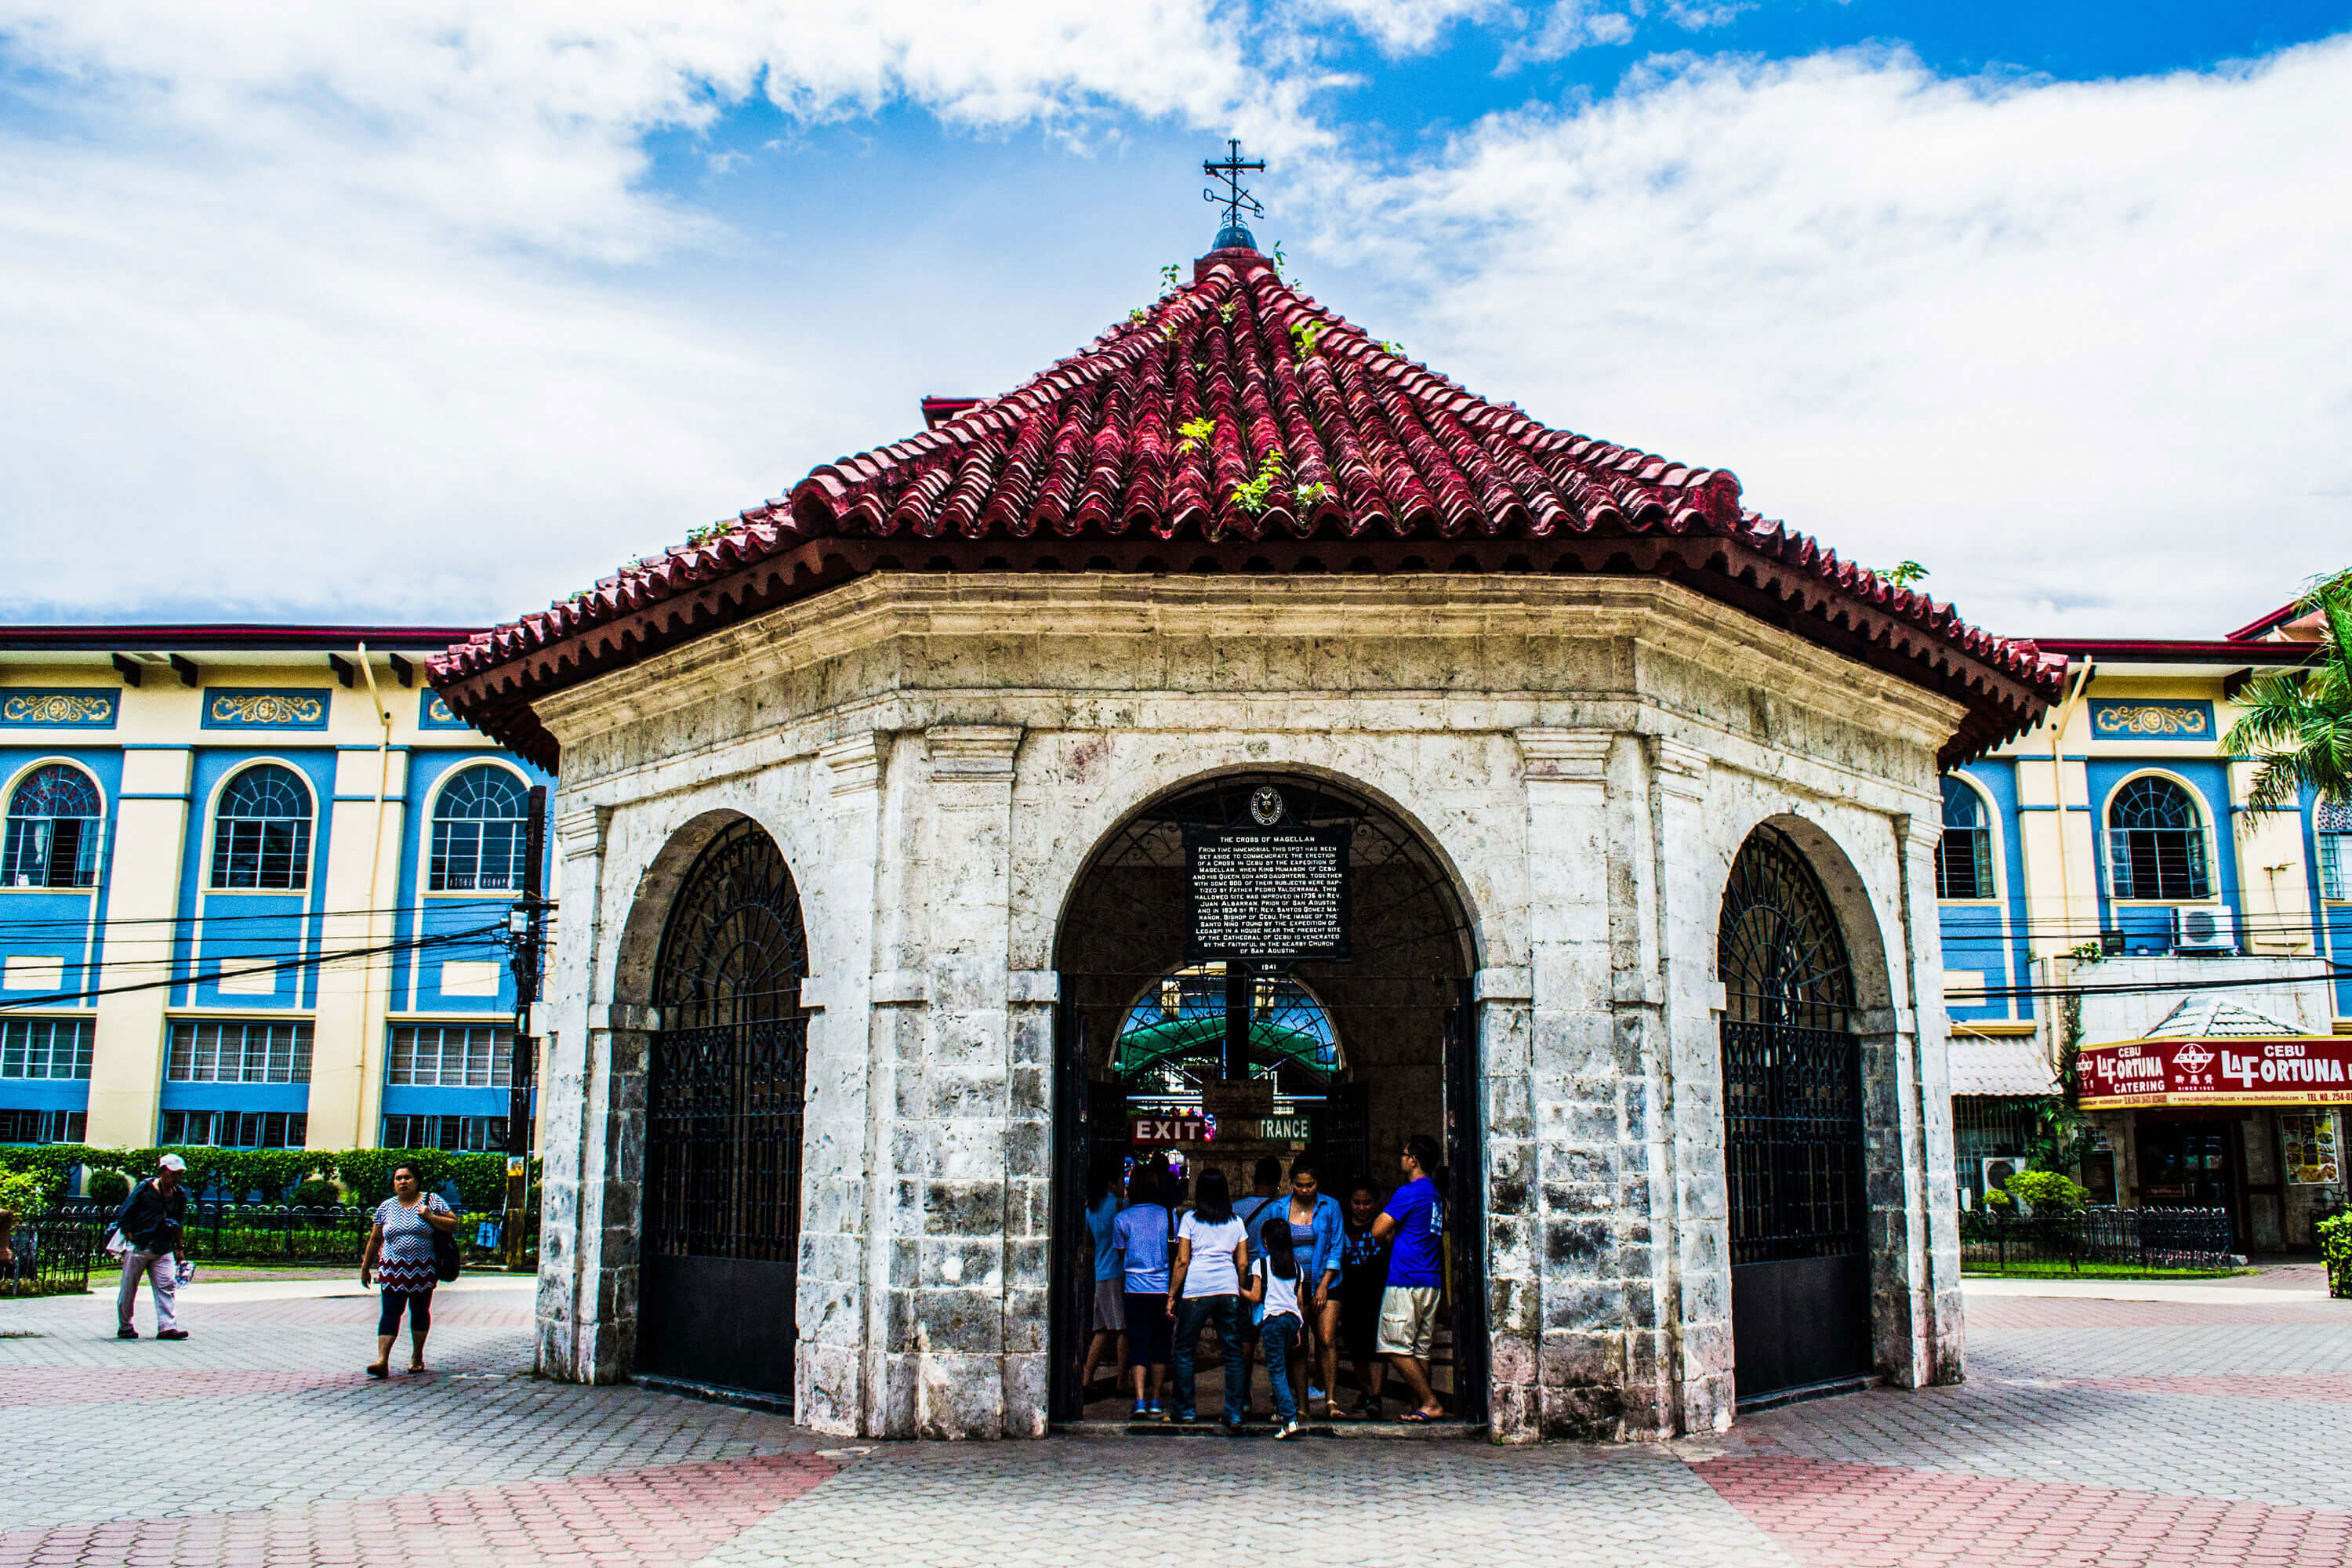 MAJOR TOURIST SPOT. Magellan’s Cross is a top tourist attraction in Cebu. It’s part of the tour circuit that includes the Basilica Minore del Sto. Niño, Cebu Metropolitan Cathedral, Fort San Pedro, and Plaza Independencia. (Photo provided by the Basilica Minore del Sto. Niño de Cebu)